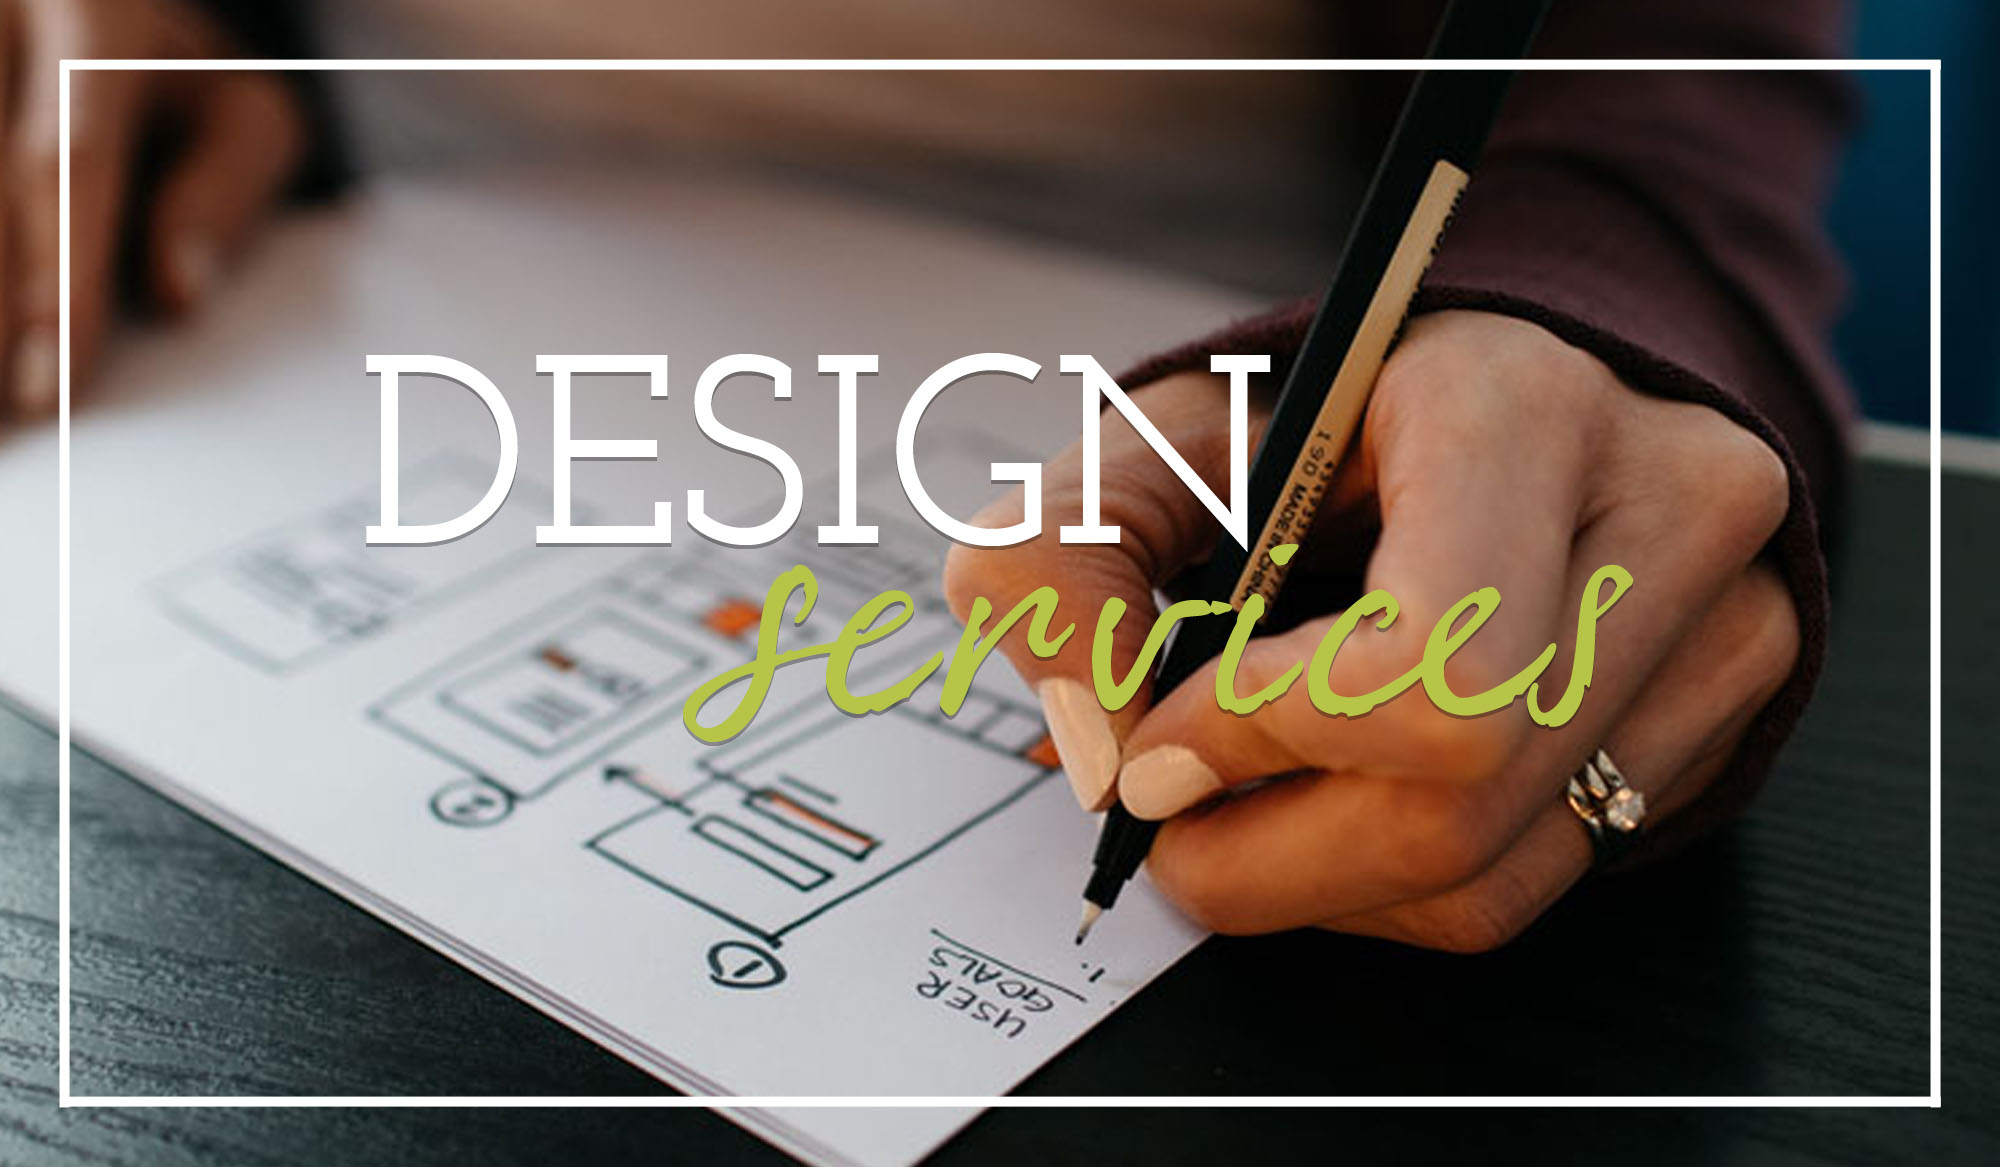 Image that says Design Services over a background of a hand holding a pen drawing a website wireframe